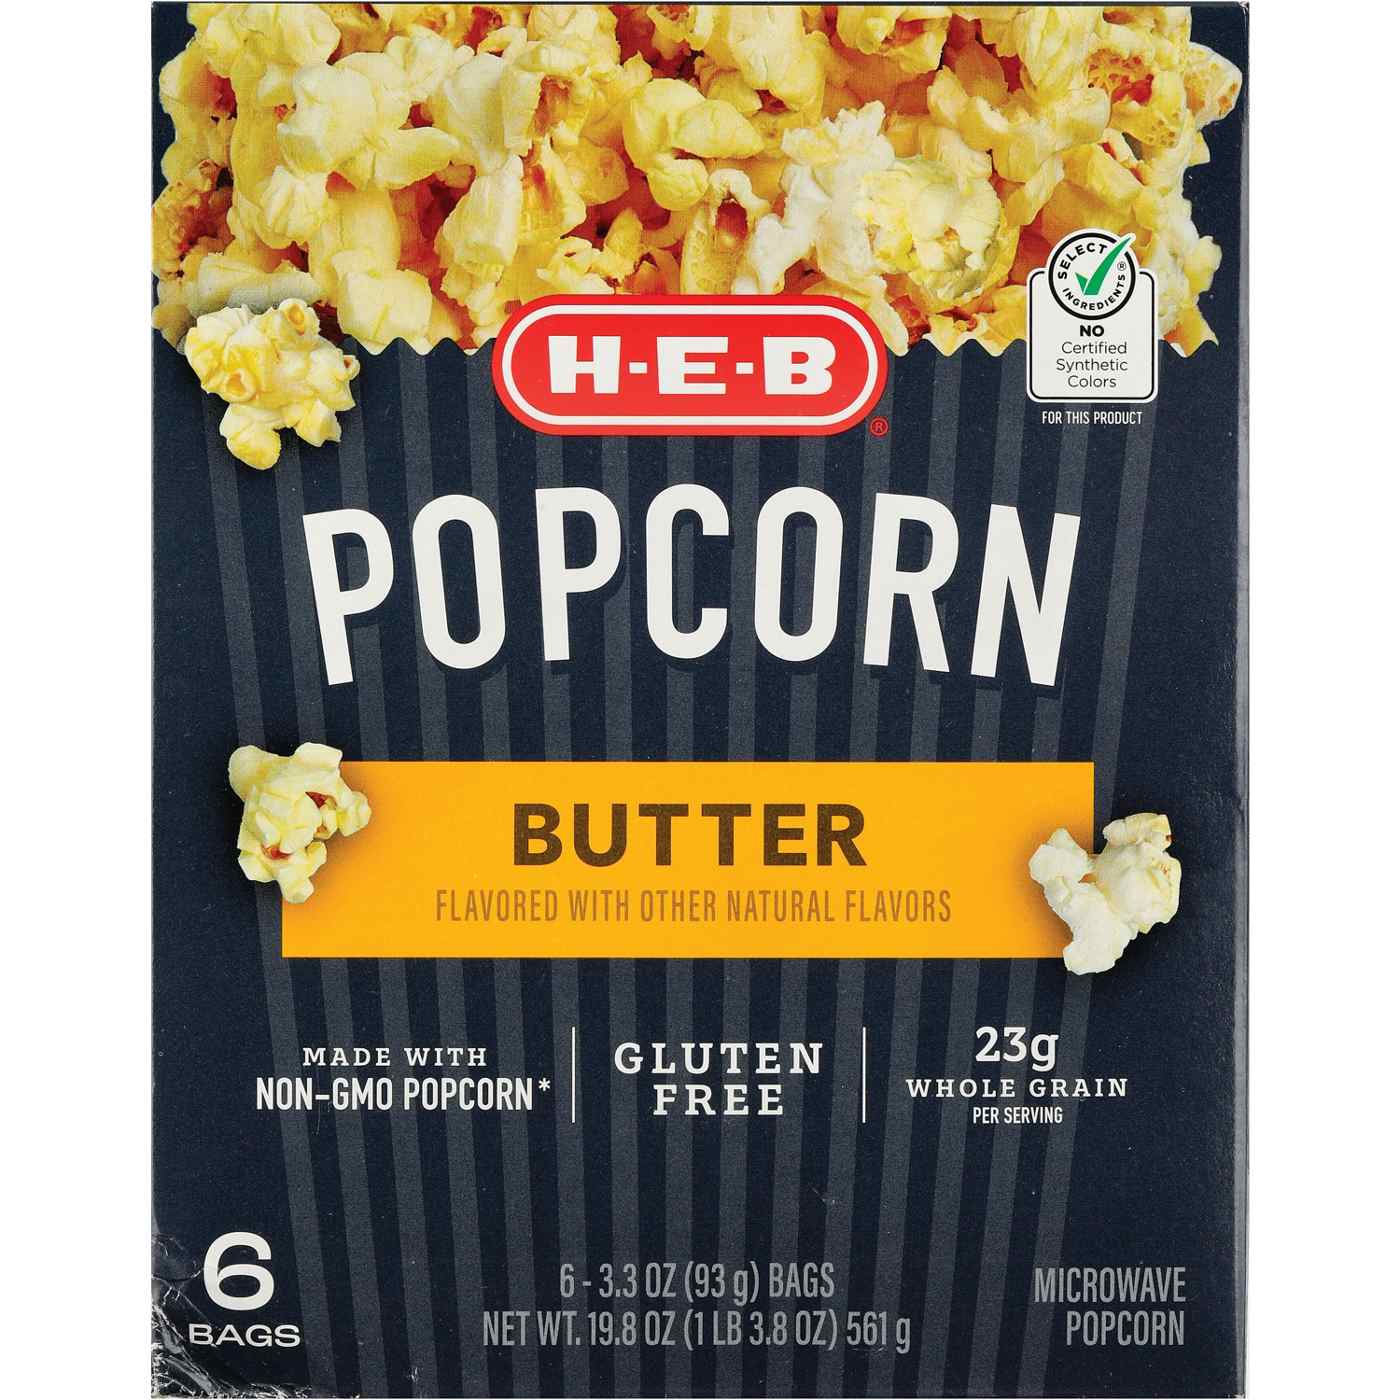 H-E-B Microwave Popcorn - Butter; image 1 of 2